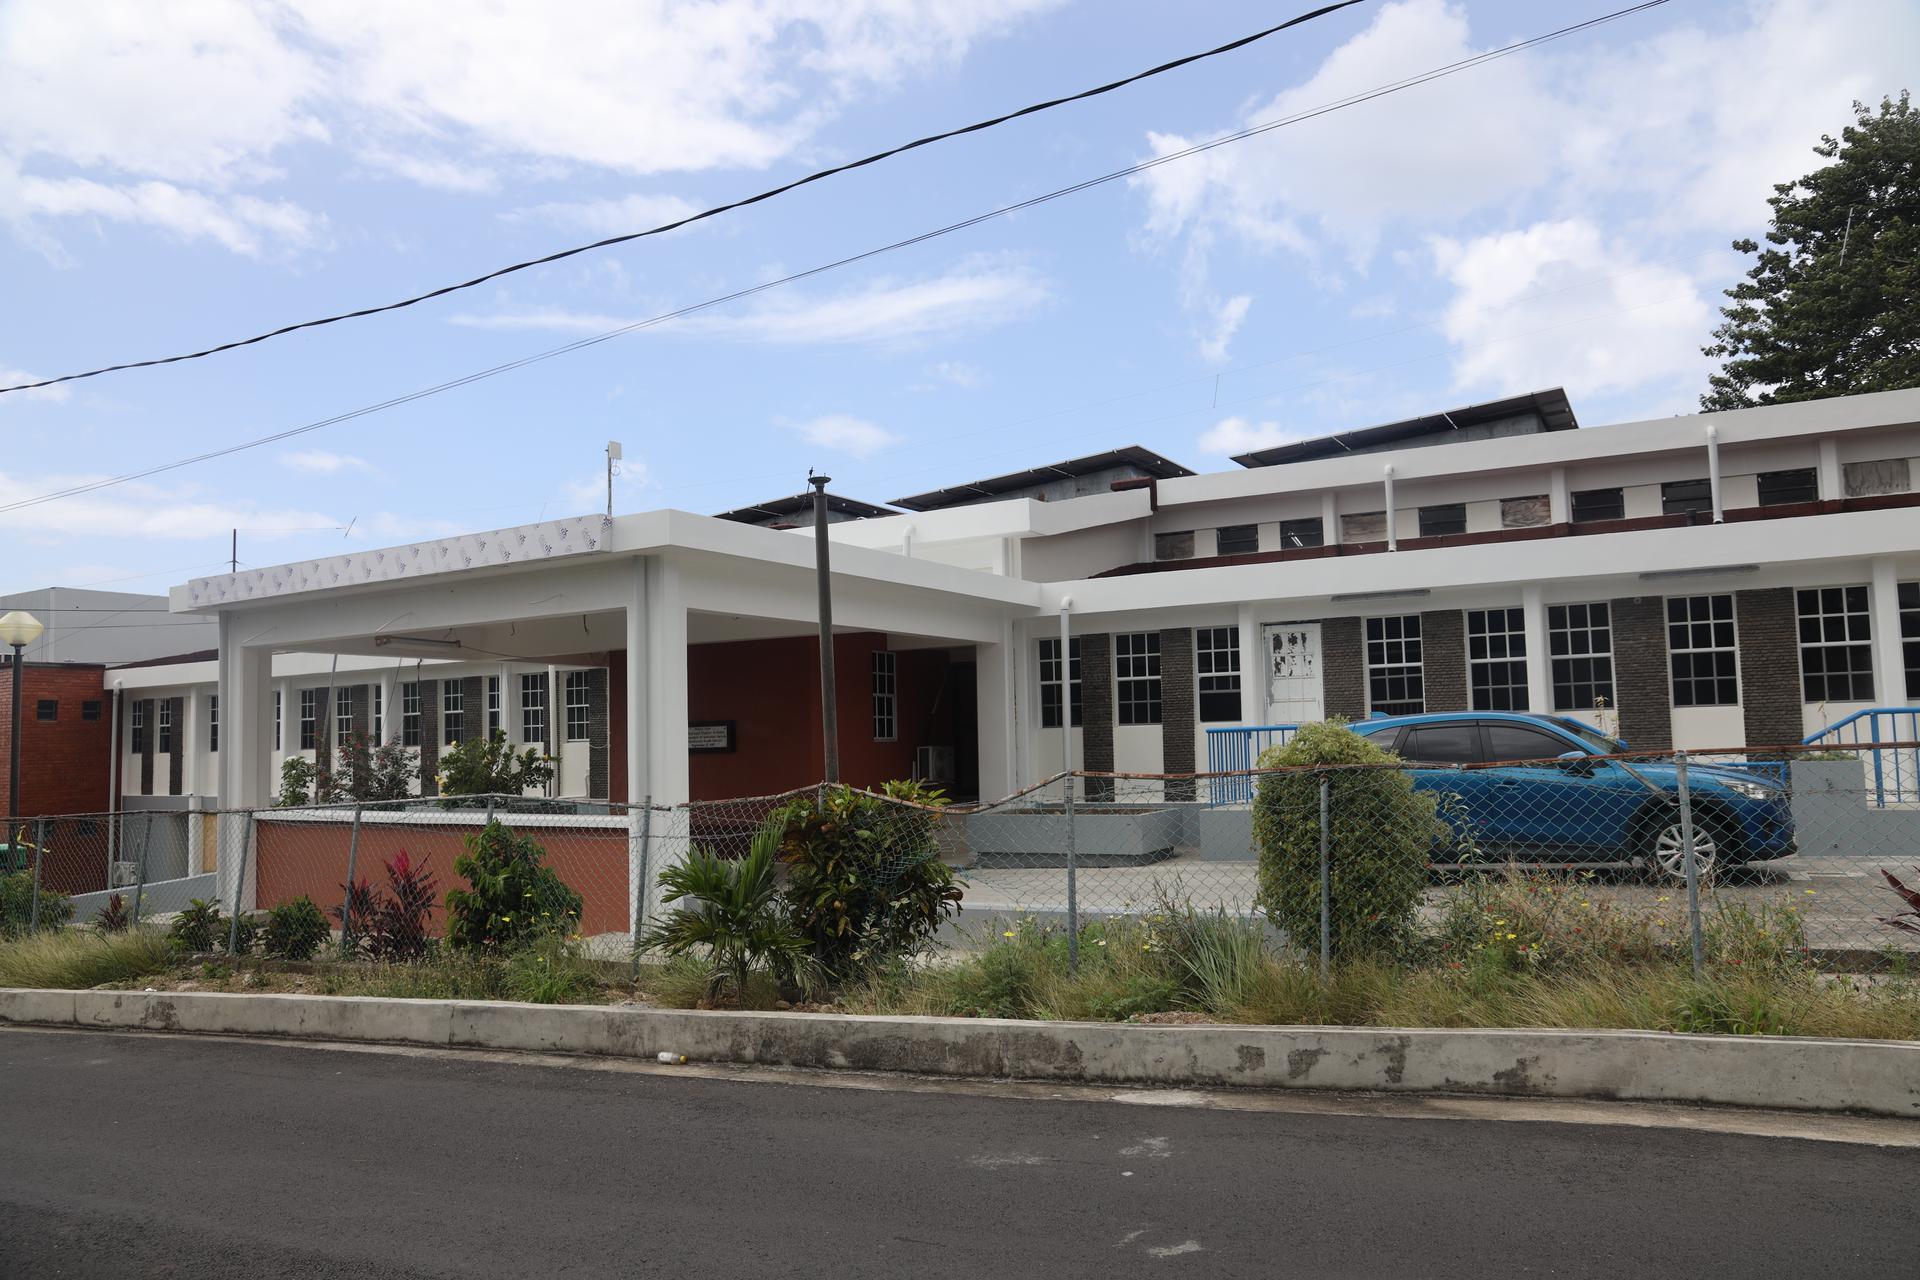 A hospital in Portsmouth, Dominica, newly fitted with solar panels to keep it running when the electrical grid goes down.